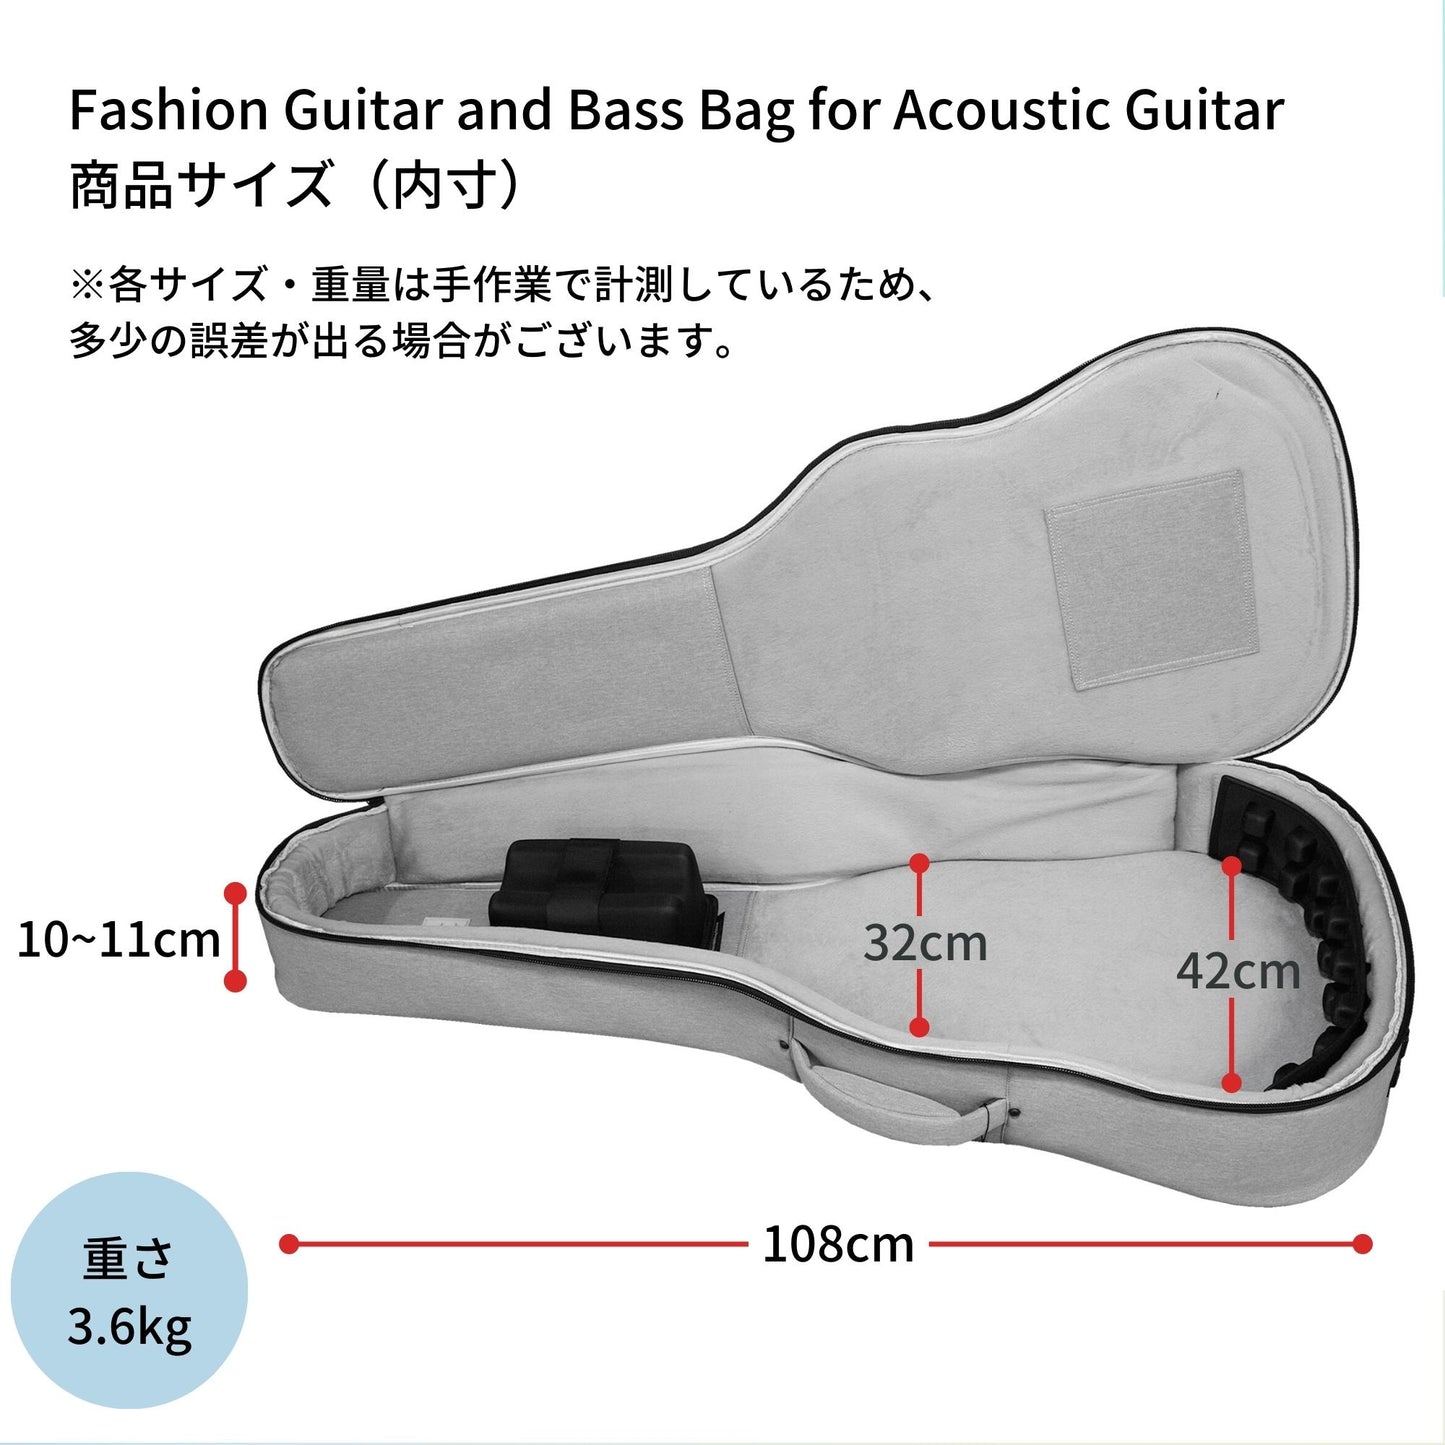 Kavaborg/Fashion Guitar and Bass Bag for Acoustic Guitar アコースティックギター用